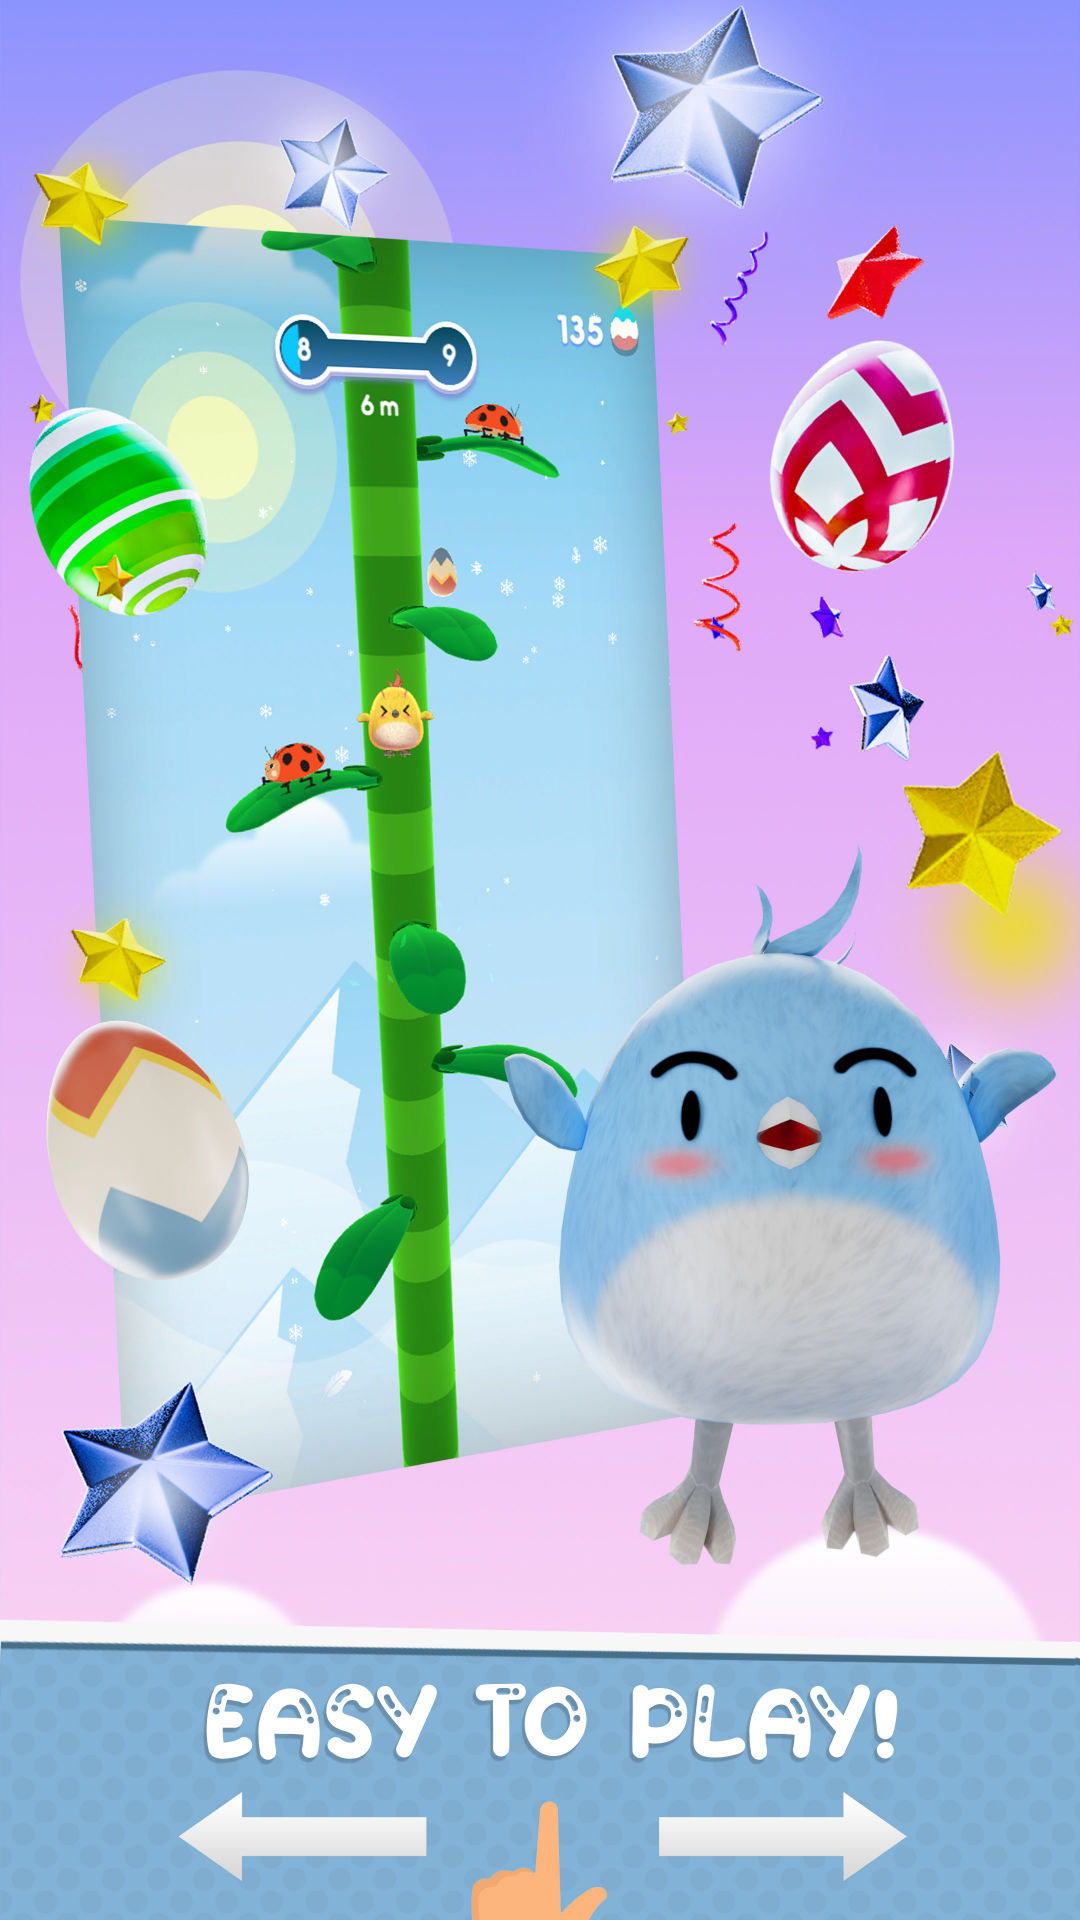 In-game screenshot of Chunky Bird, showing character jumping on leaves, as well as another colorful game character